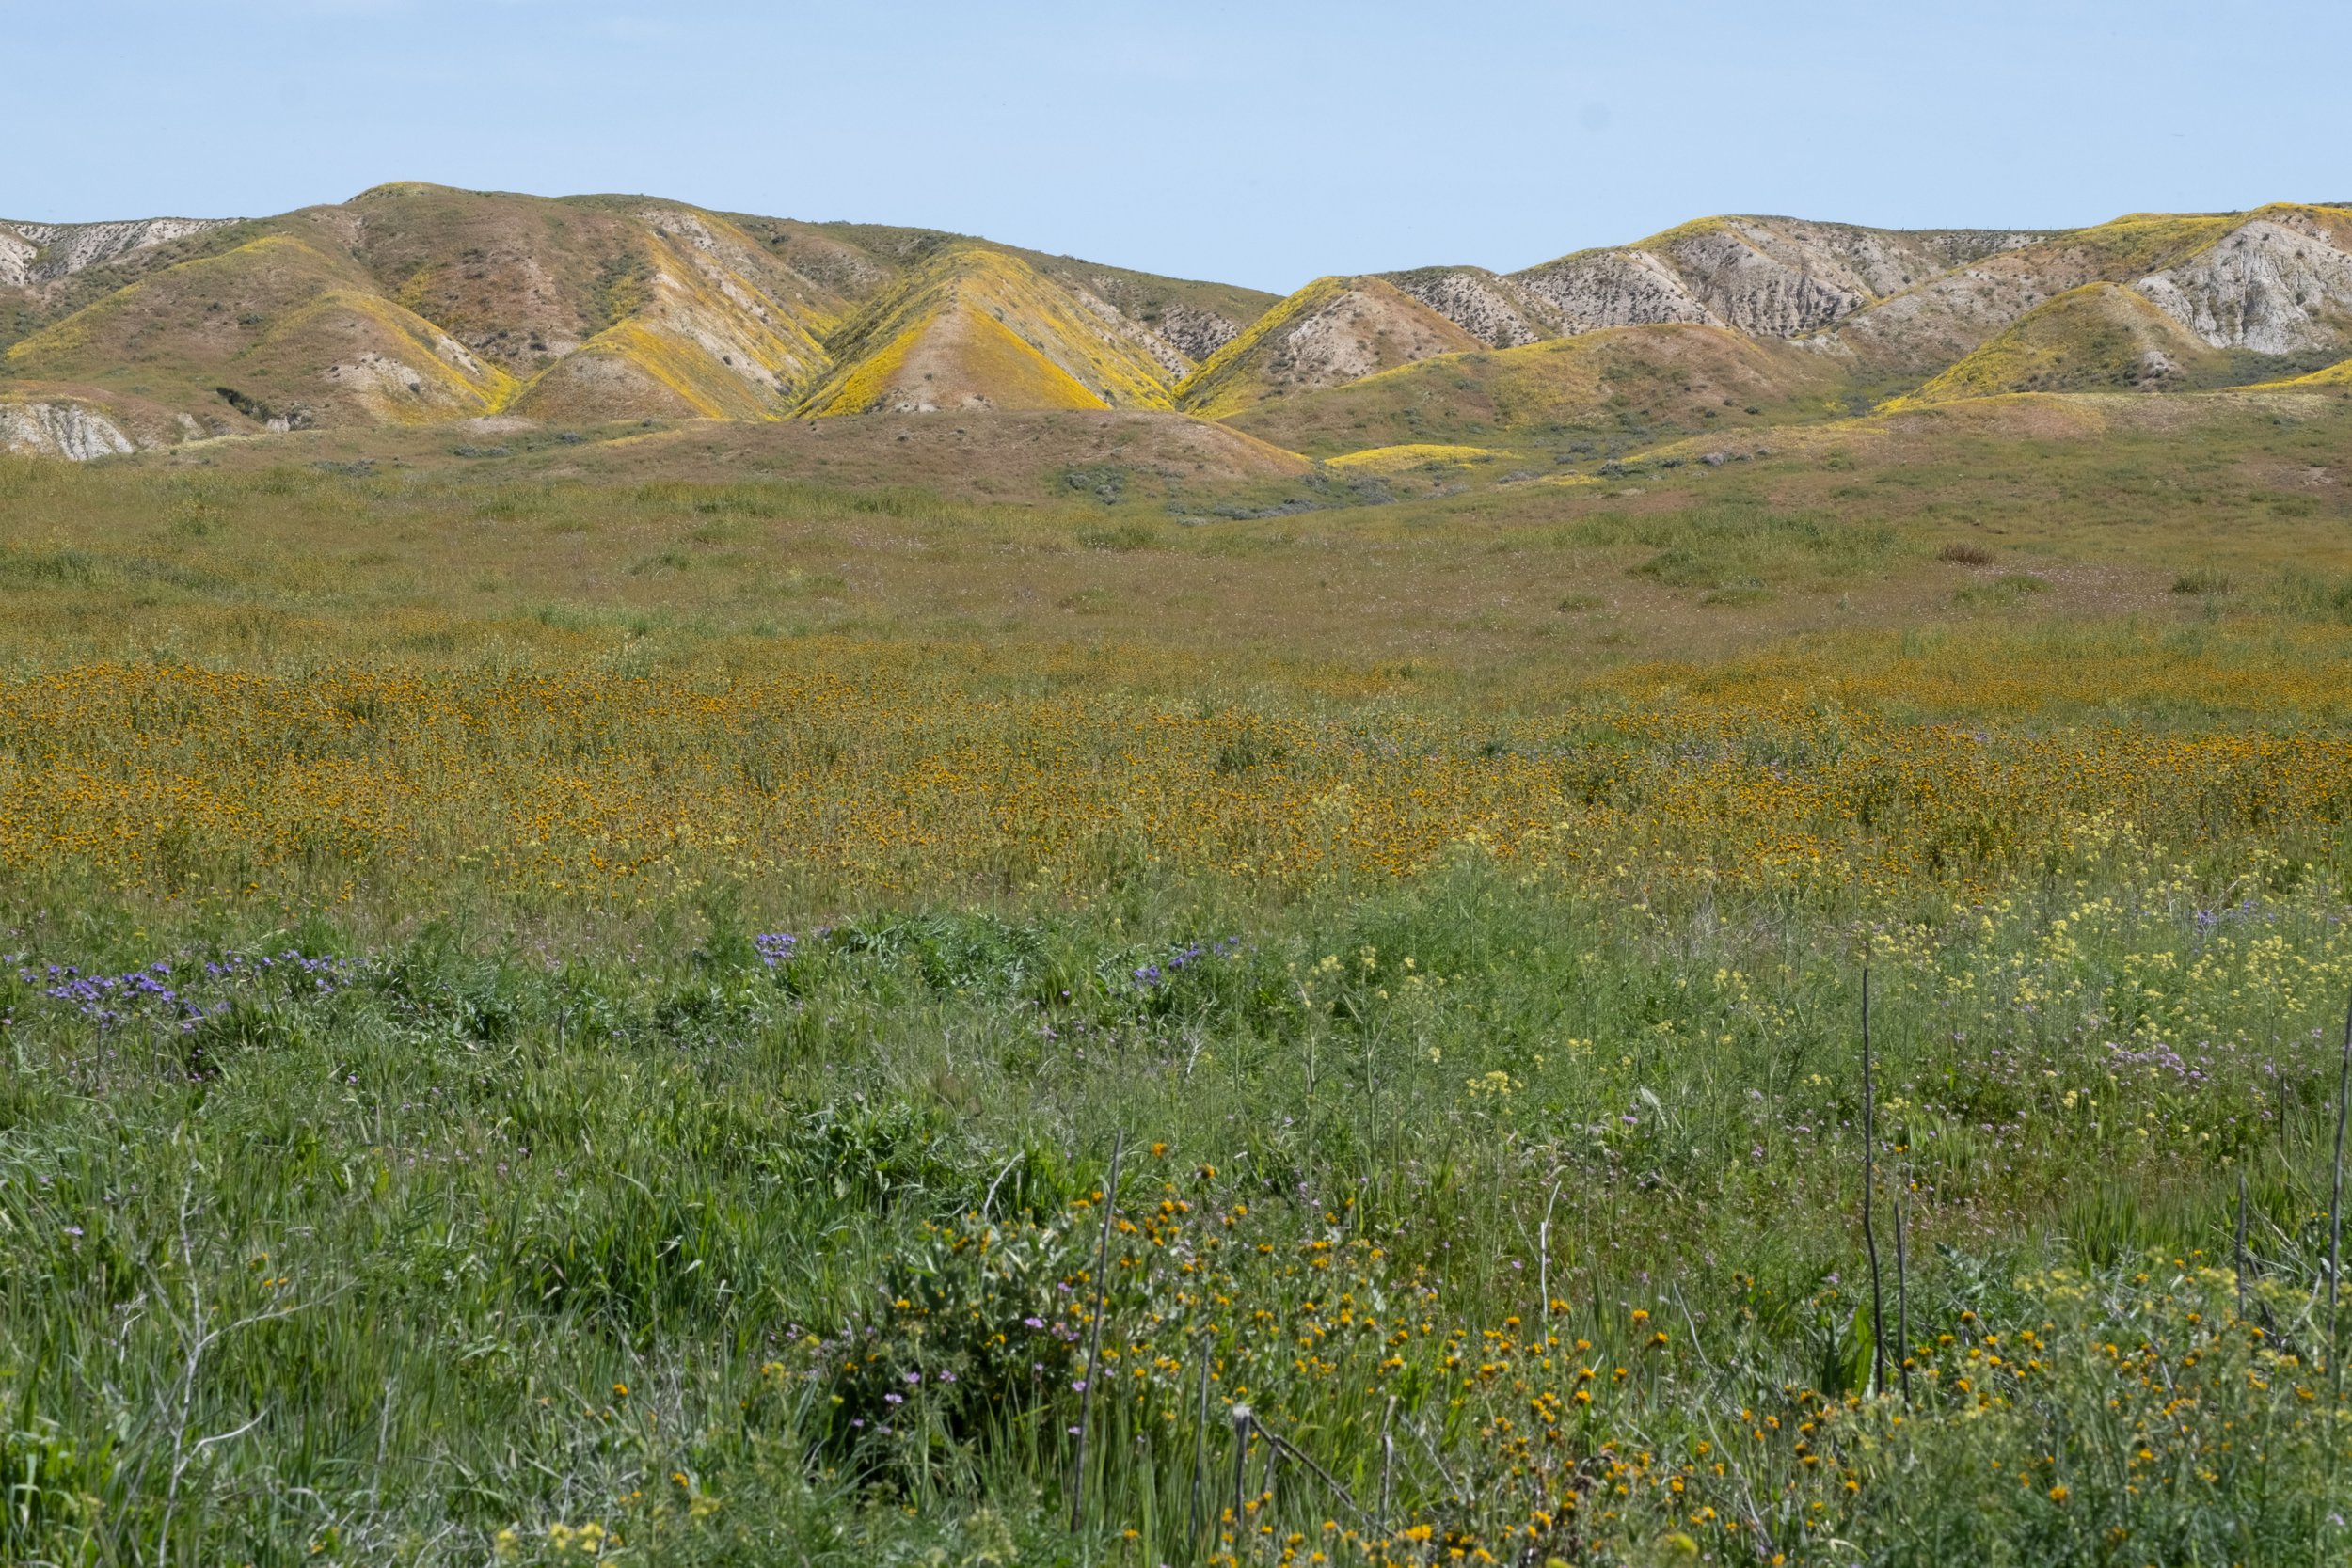  The wildflowers are blooming profusely in Carrizo Plain National Monument in Santa Margarita, Calif. on Monday, April 24th, 2023. Soda Lake Road runs through the middle and offers an easy way to see the views. (Akemi Rico | The Corsair) 